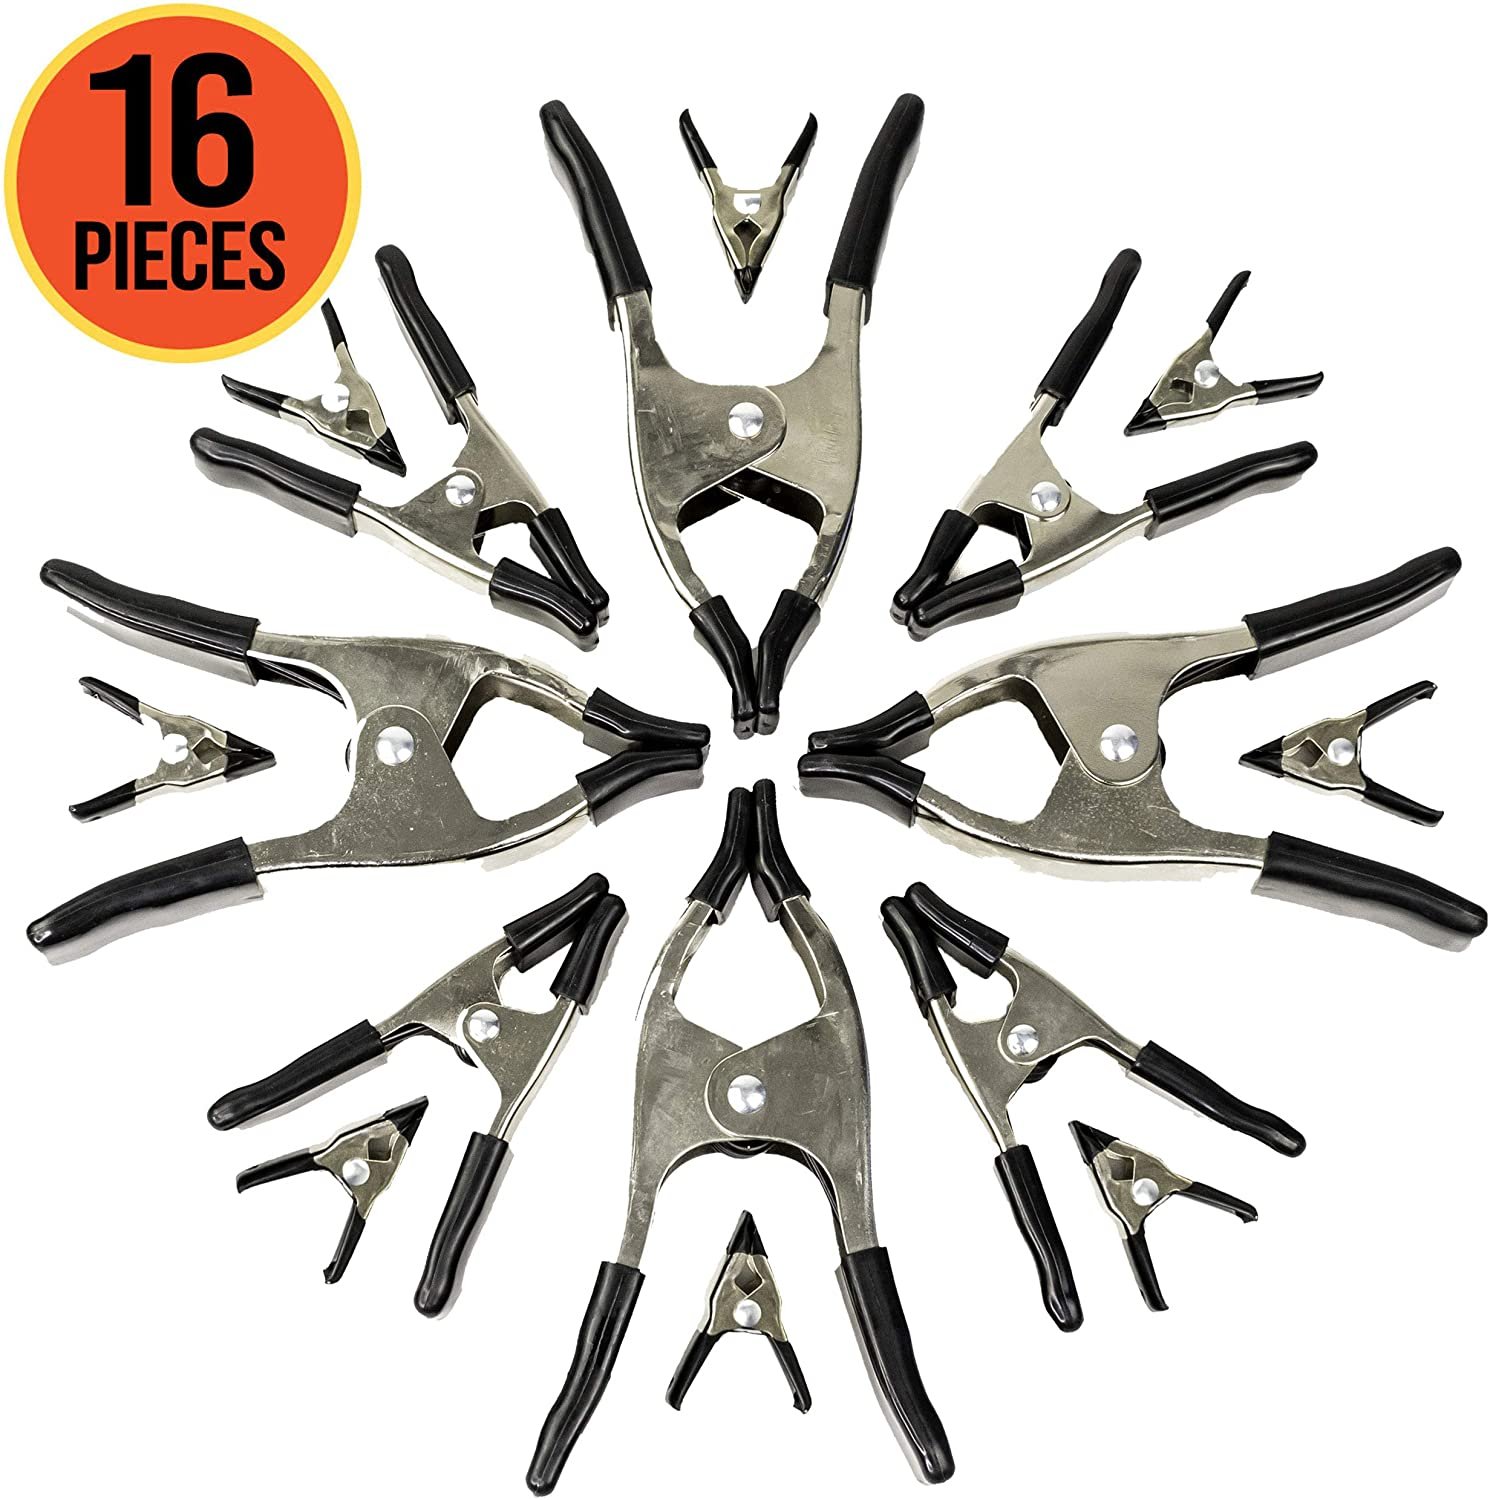 Wellmax 16PC Metal Spring Clamps Set, Heavy Duty Clips for Clamp Woodworking and Backdrops, 8pc 2 inch, 4pc 4 inch and 4pc 6 inch - image 1 of 9